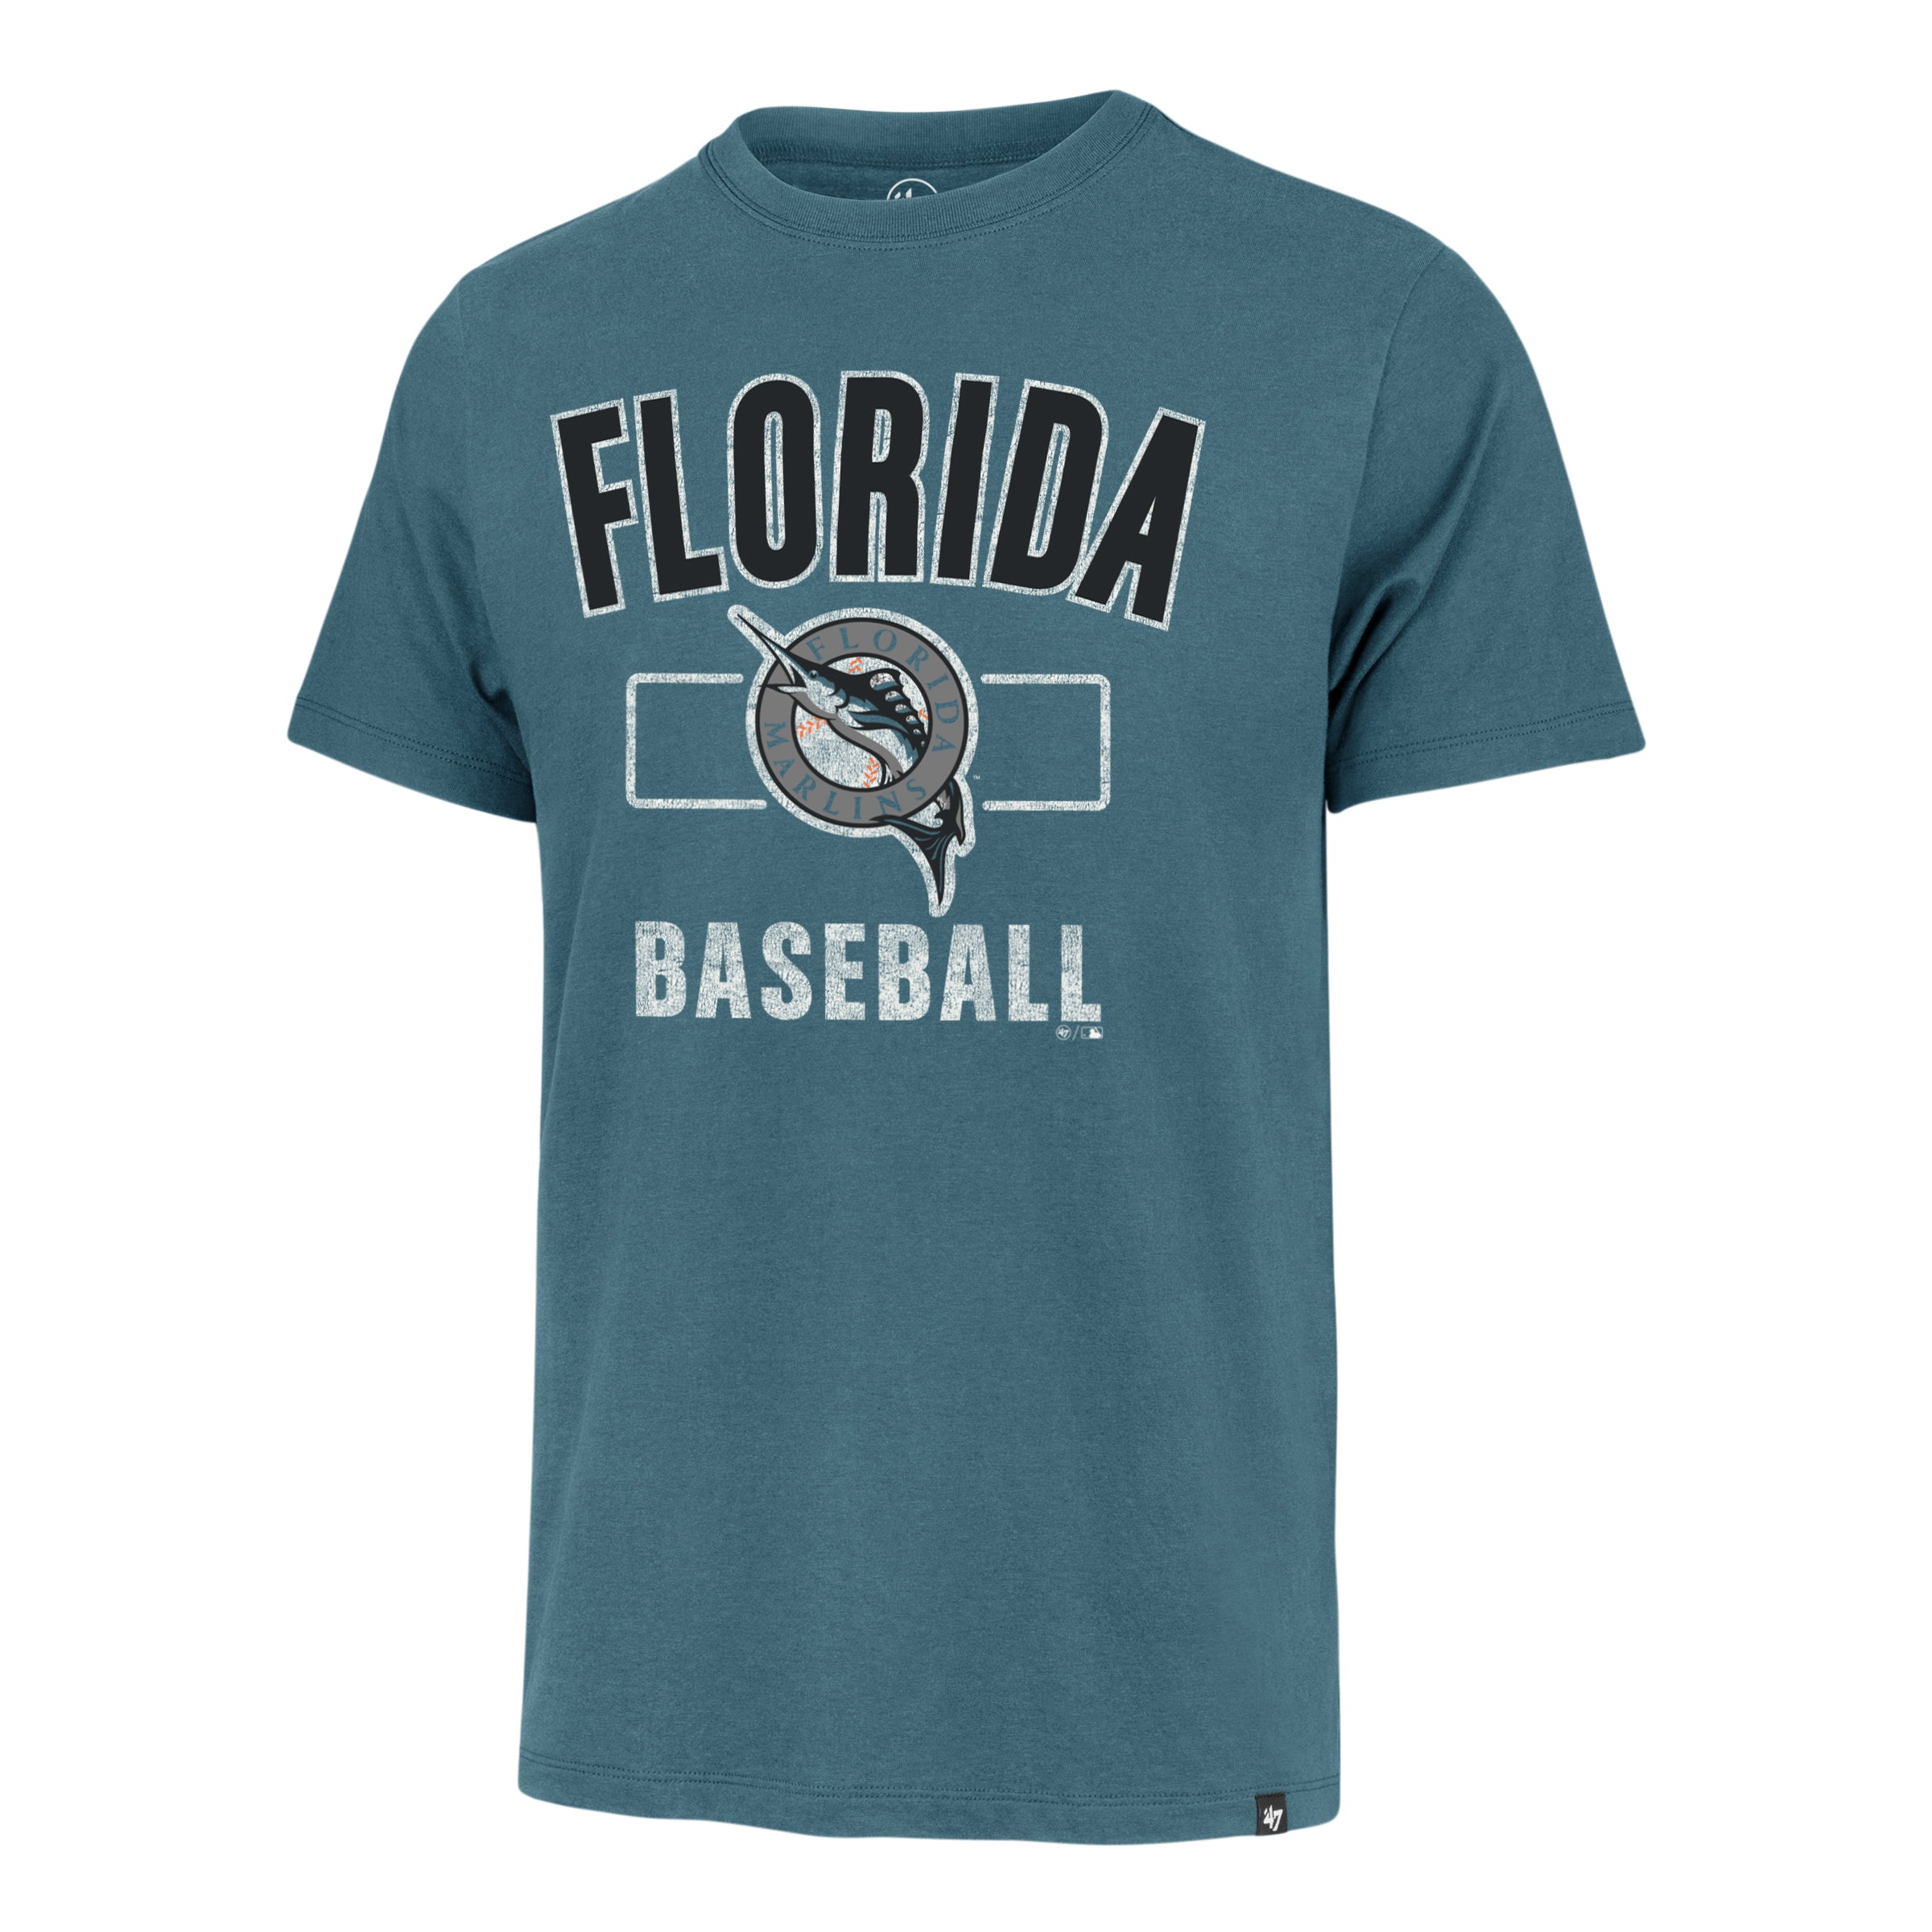 Miami Marlins 47 Brand Cooperstown Oceanic Cityside Franklin T-Shirt - Teal